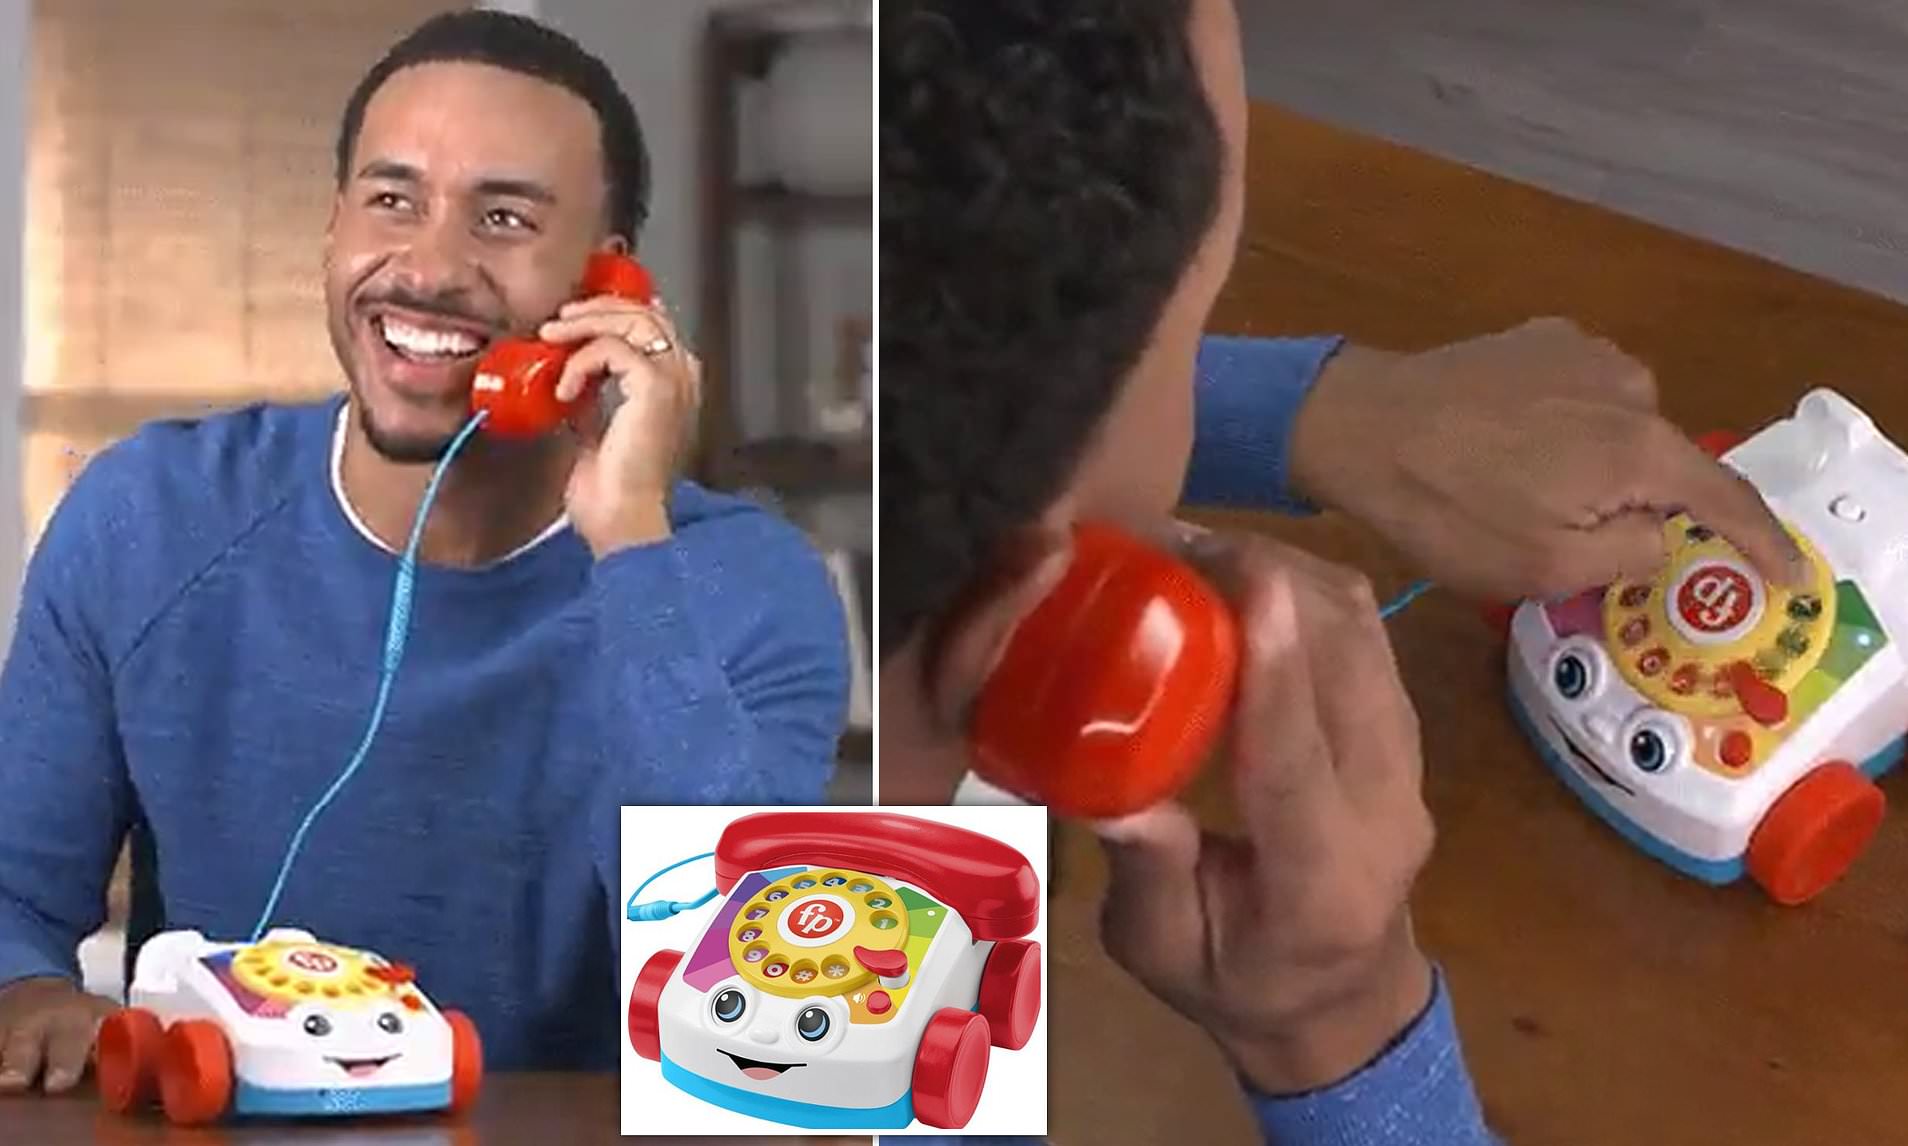 Fisher-Price, Chatter Telephone